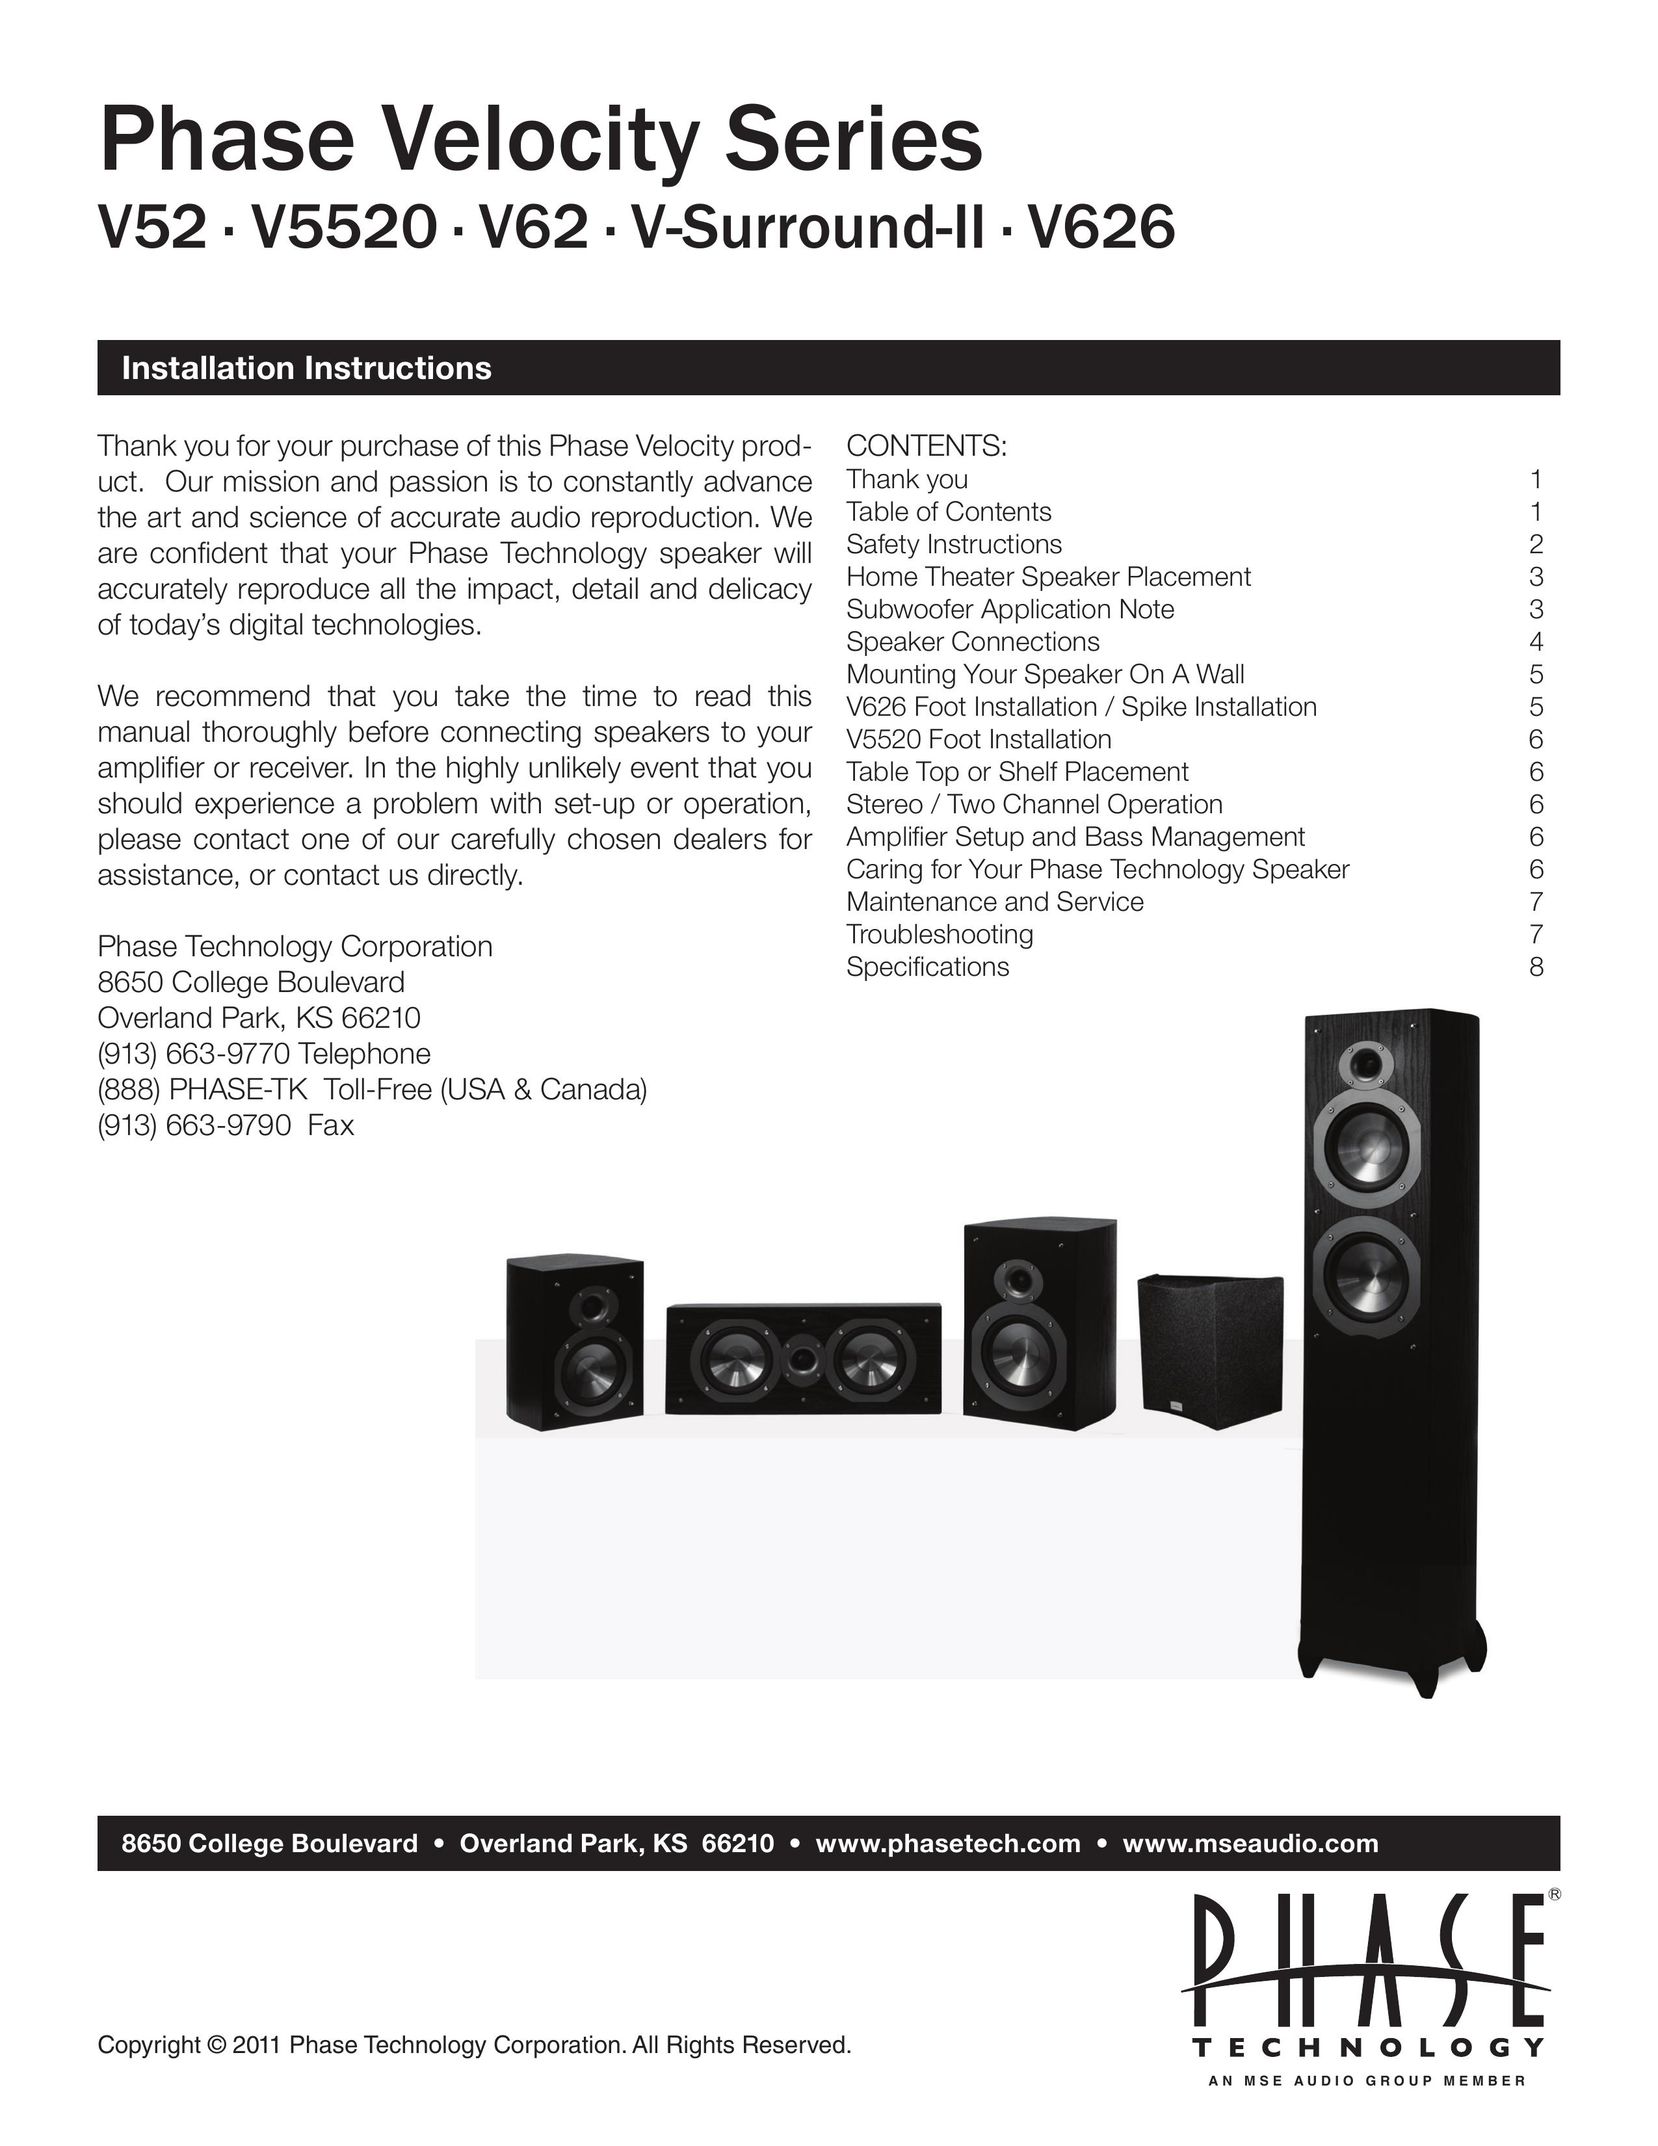 Phase Technology V626 Home Theater System User Manual